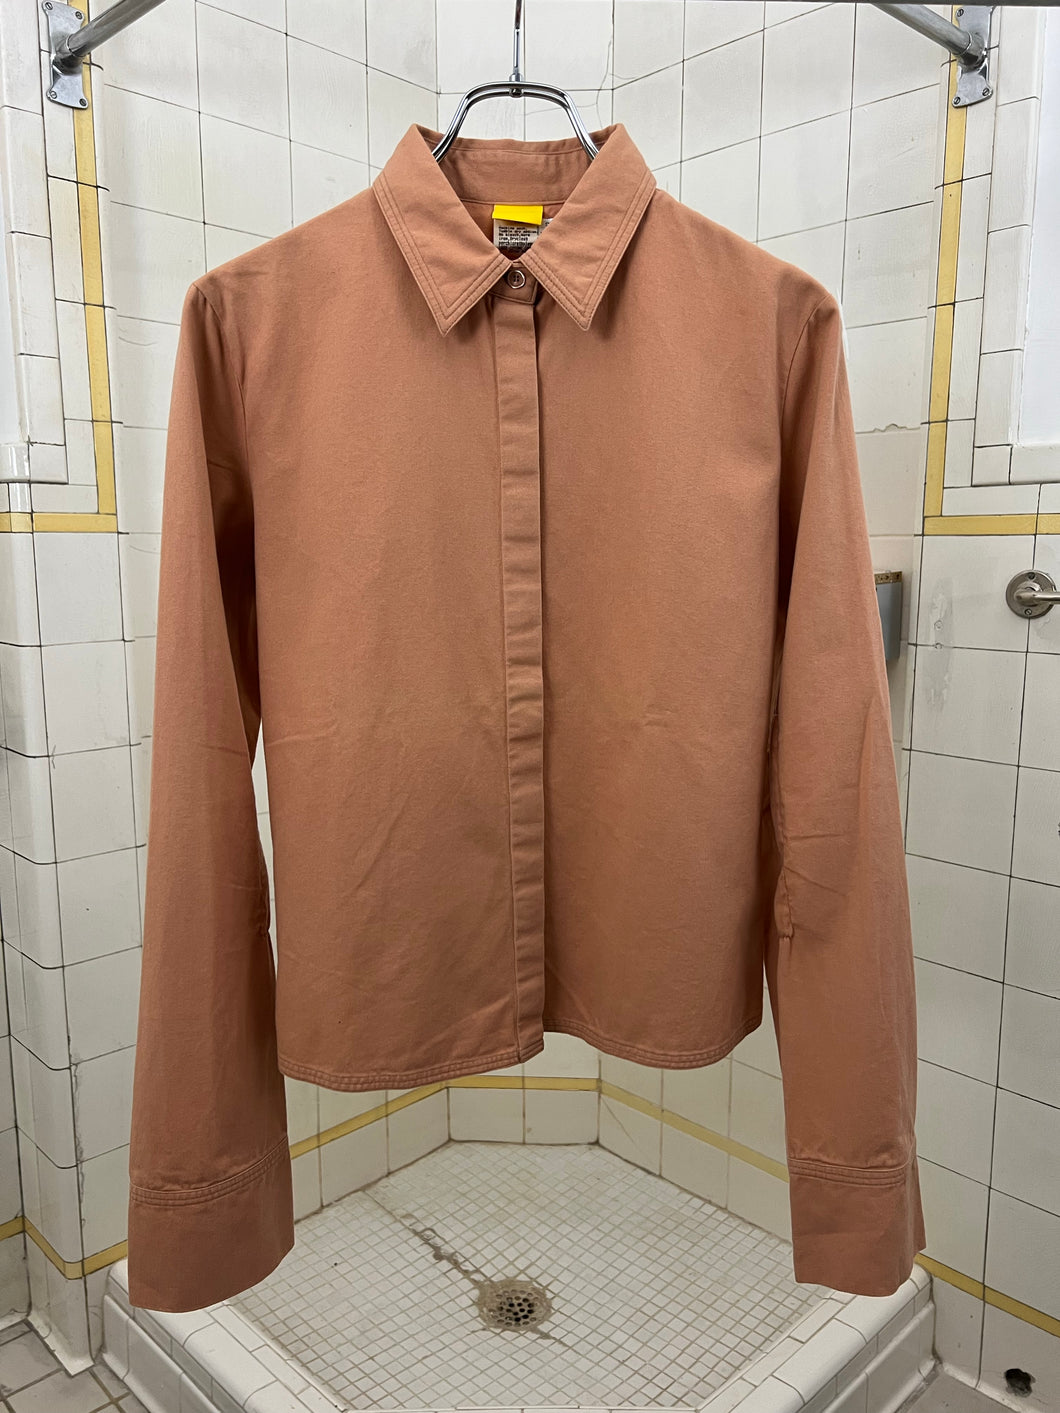 2000s Mandarina Duck Cropped Dress Shirt with Back and Elbow Detailing - Size S